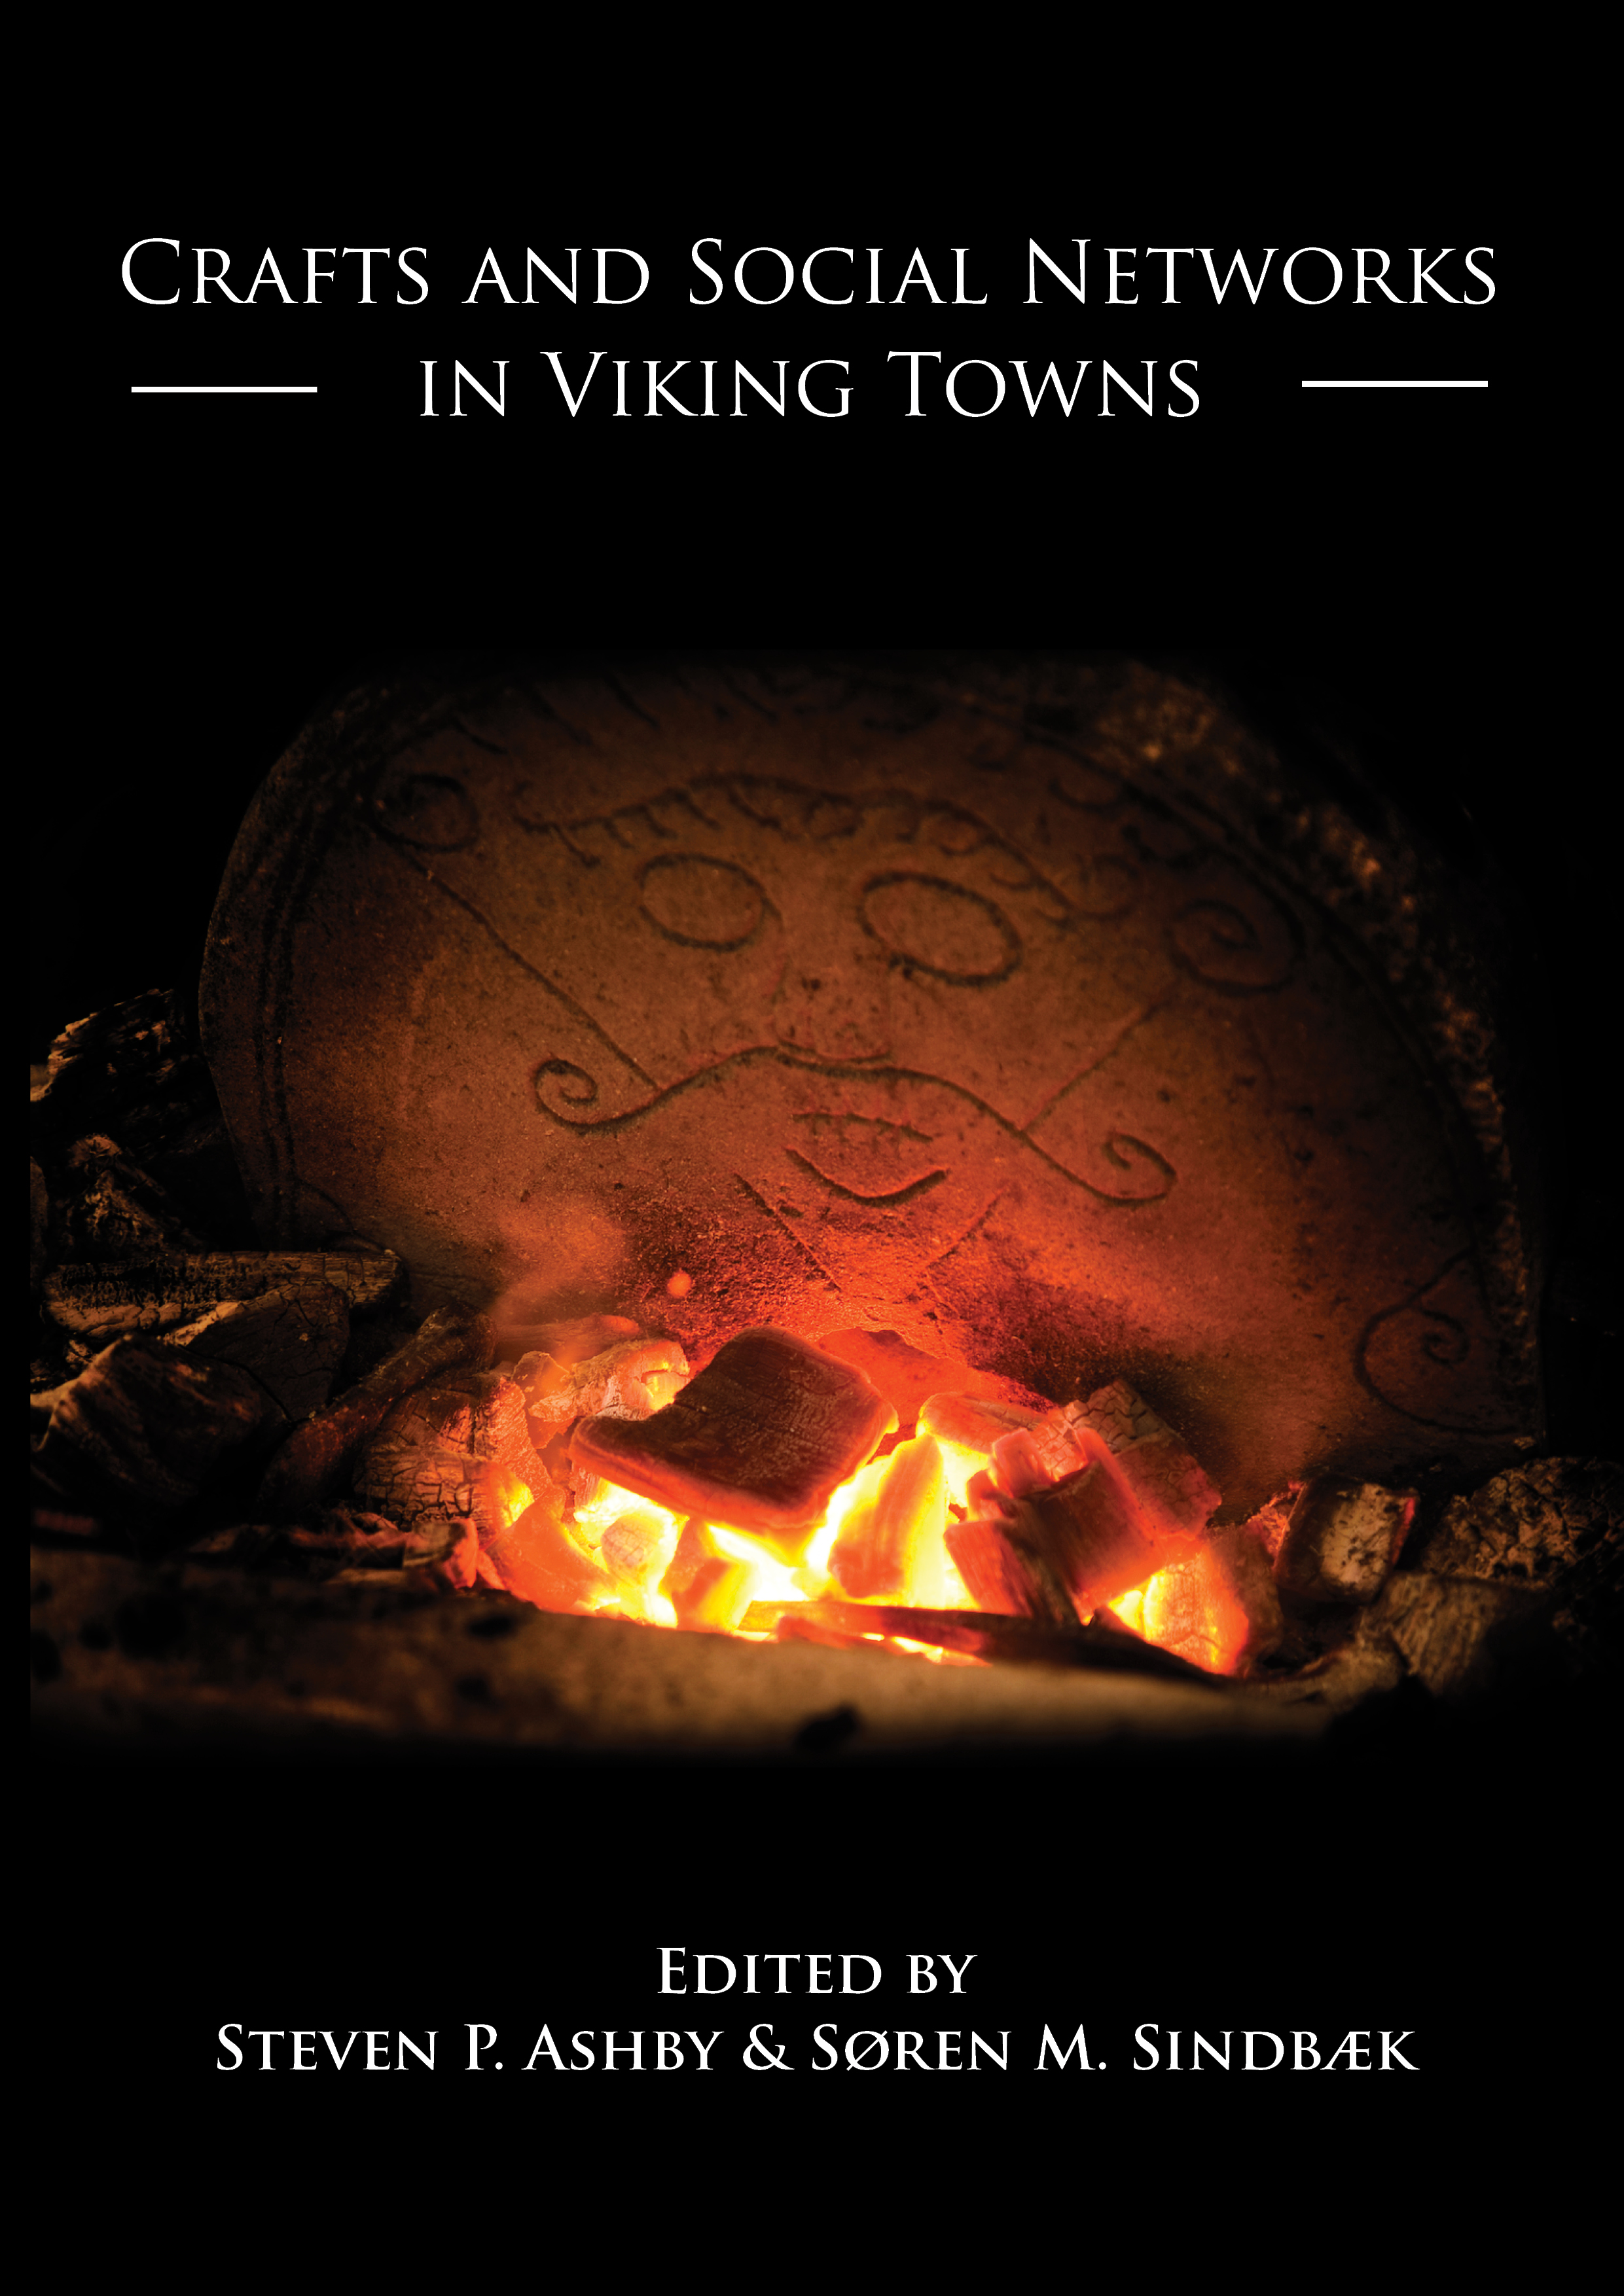 Crafts and Social Networks in Viking Towns bgook cover